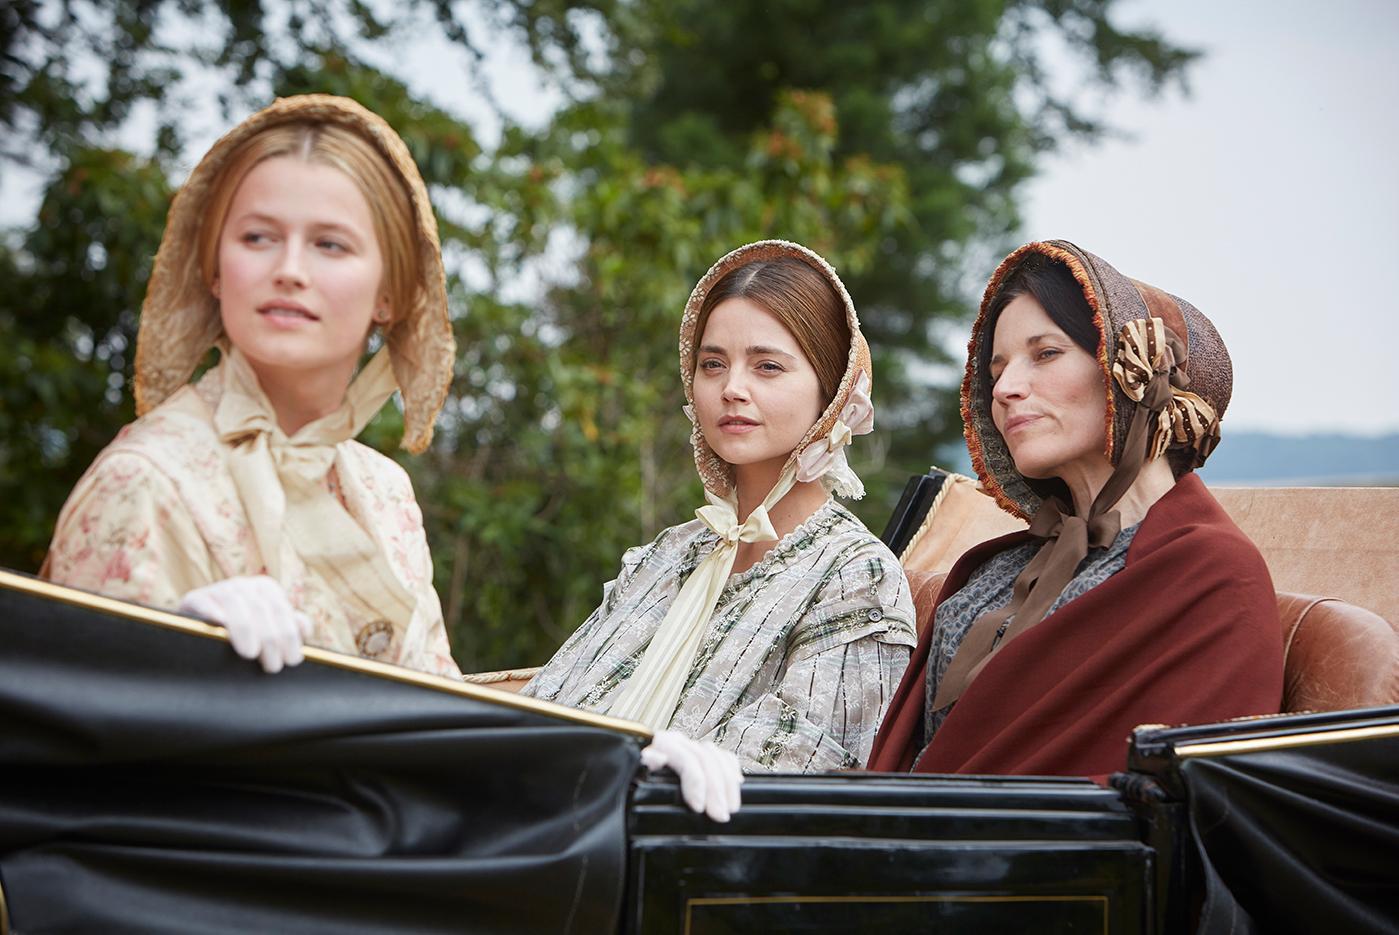 Sophie (Lilly Travers), Victoria (Jenna Coleman), and Feodora (Kate Fleetwood) in Victoria. Photo: Justin Slee/ITV Plc for MASTERPIECE